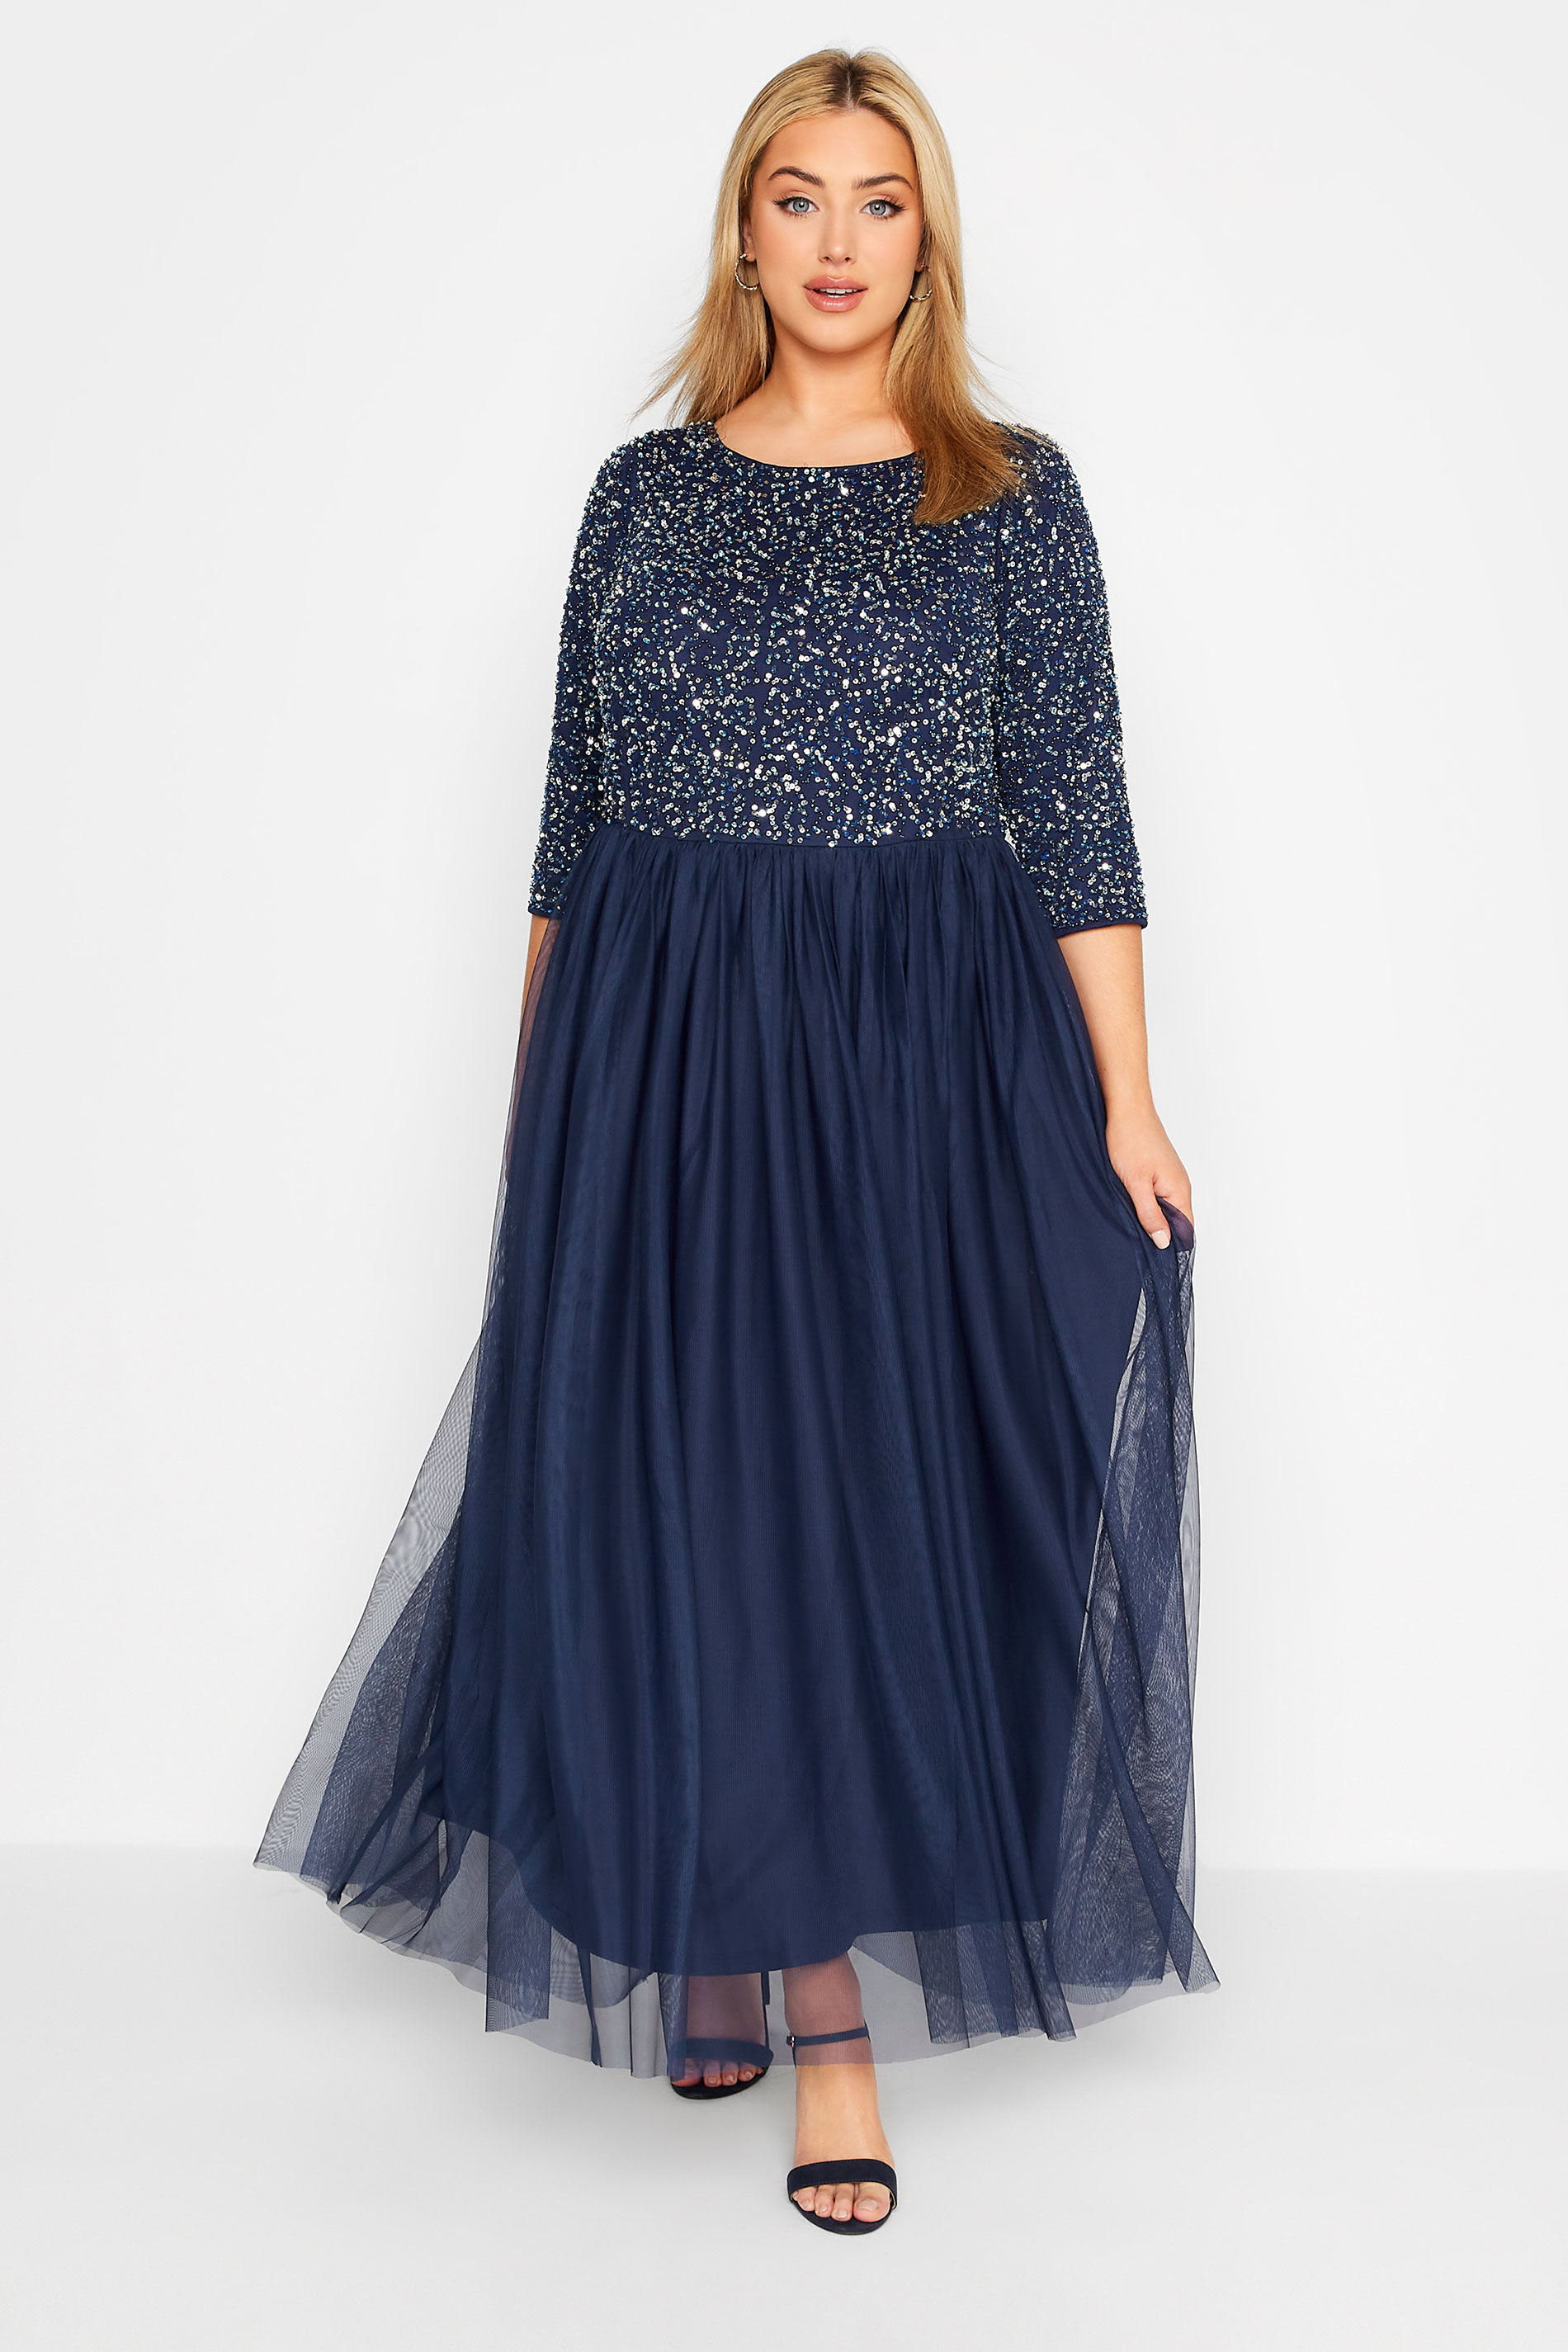 LUXE Curve Navy Blue Sequin Embellished Maxi Dress_A.jpg